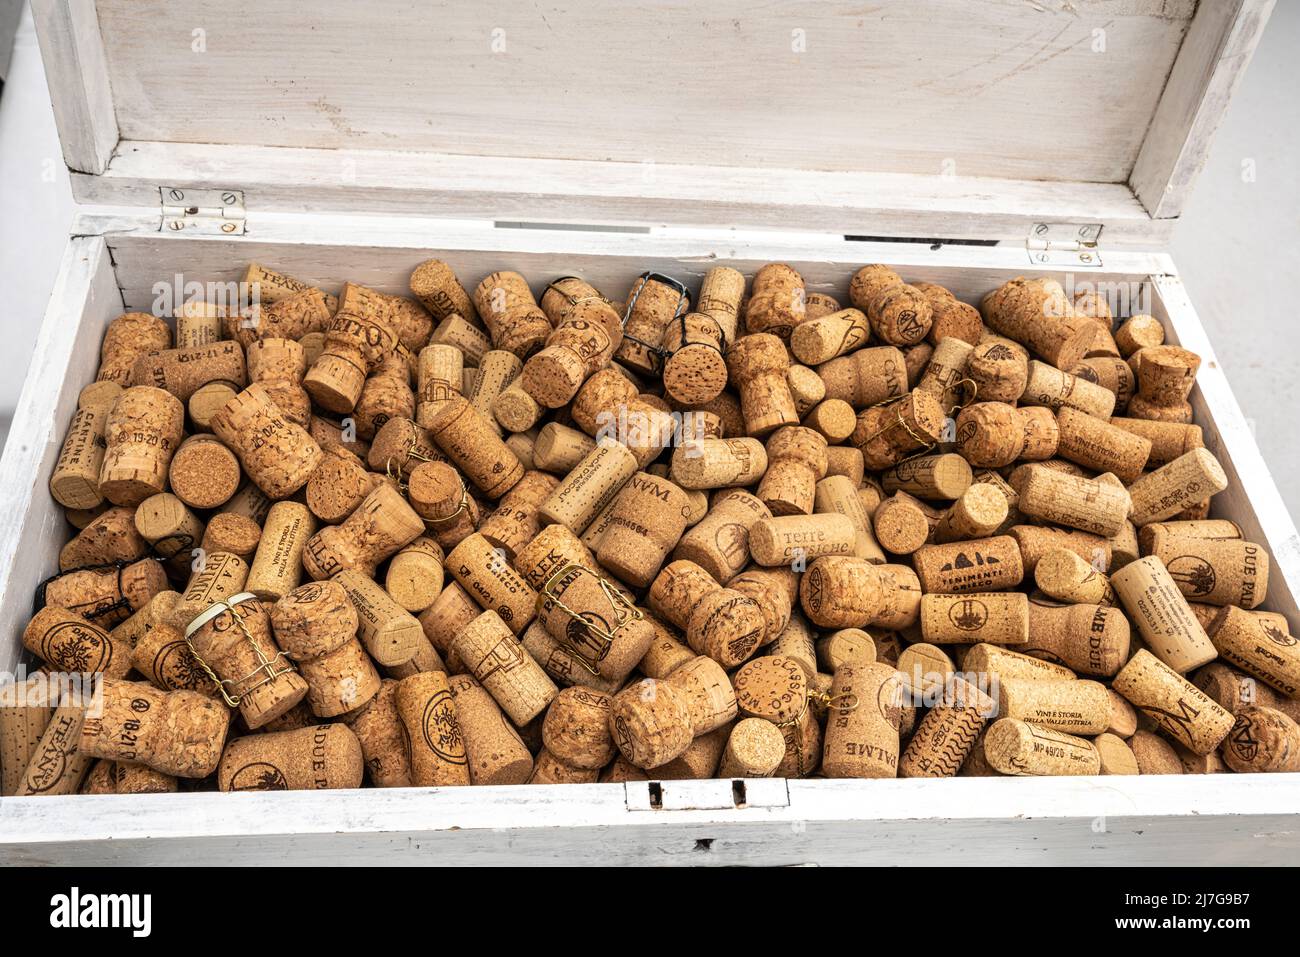 Corks of wine and sparkling wine bottles in a white case. Peschici, Foggia province, Puglia, Italy, Europe Stock Photo